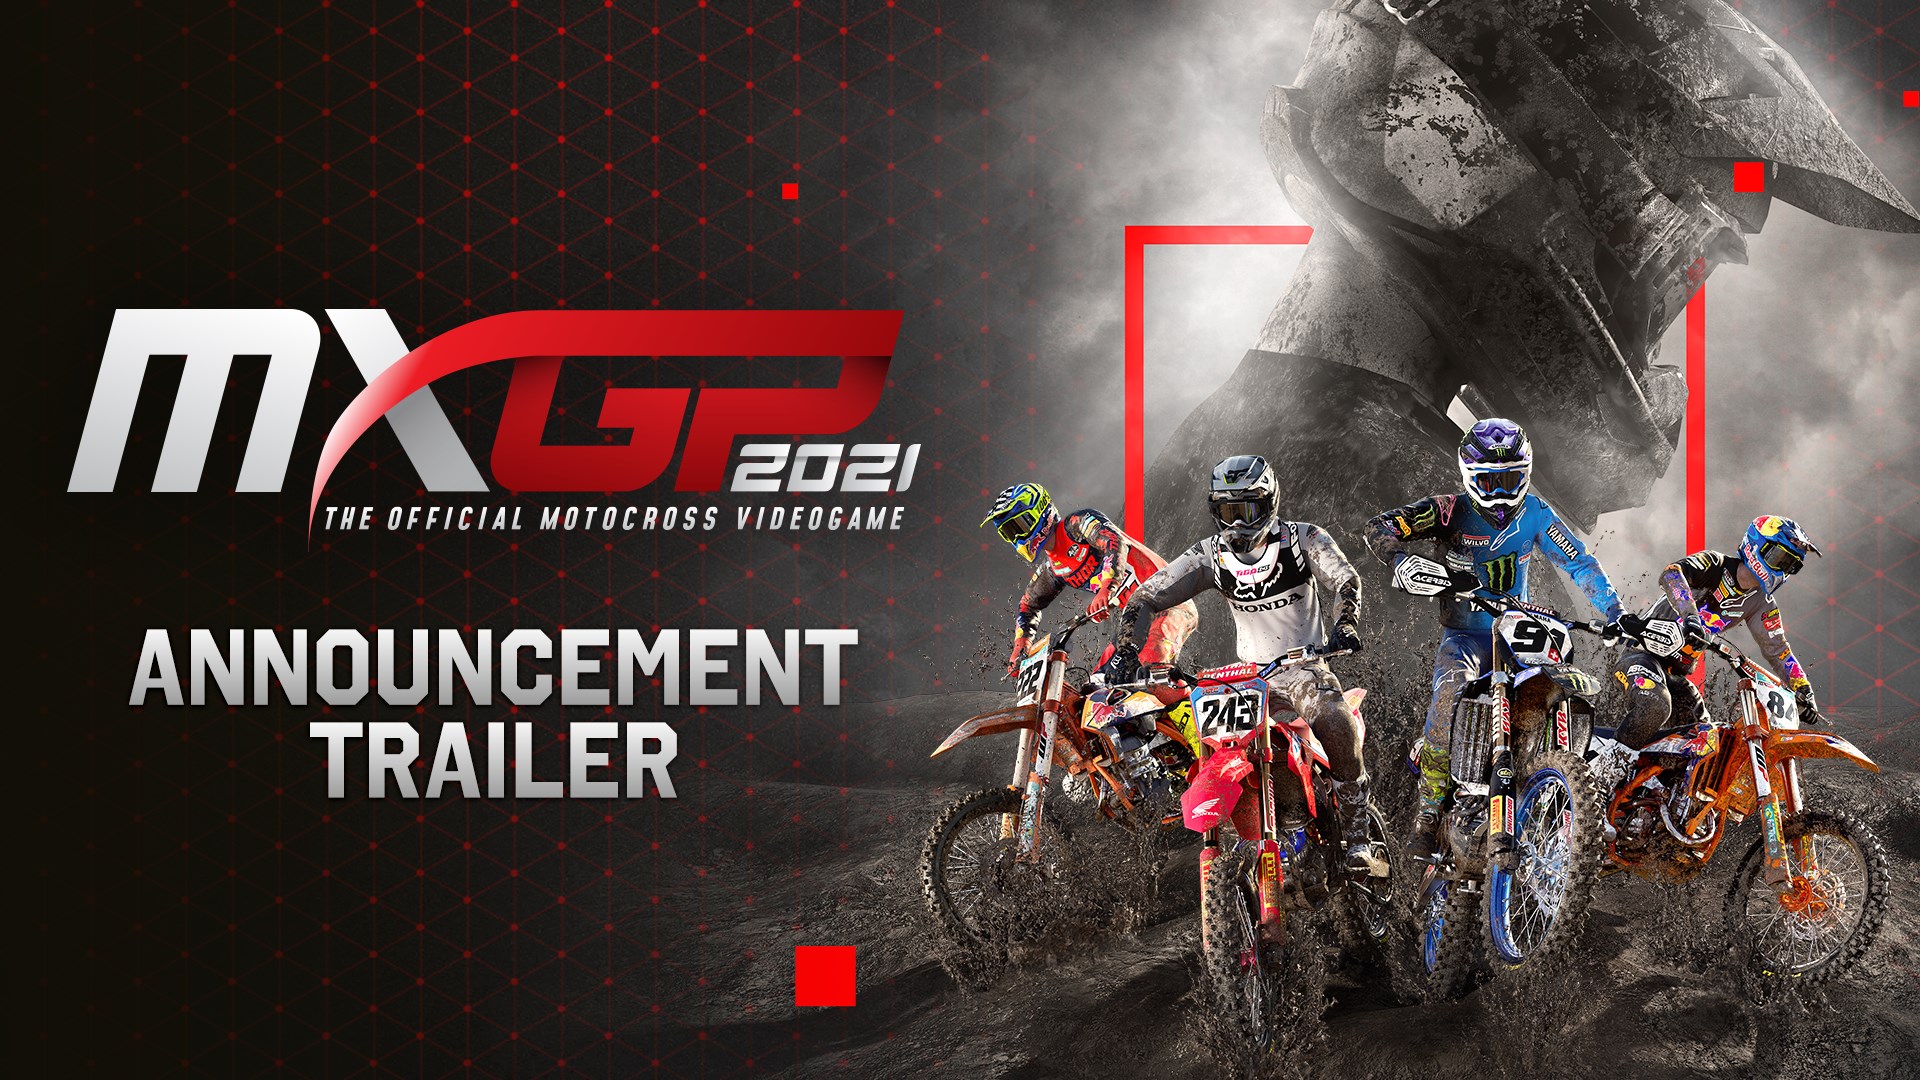 Mxgp 3 The Official Motocross Video Game - Switch